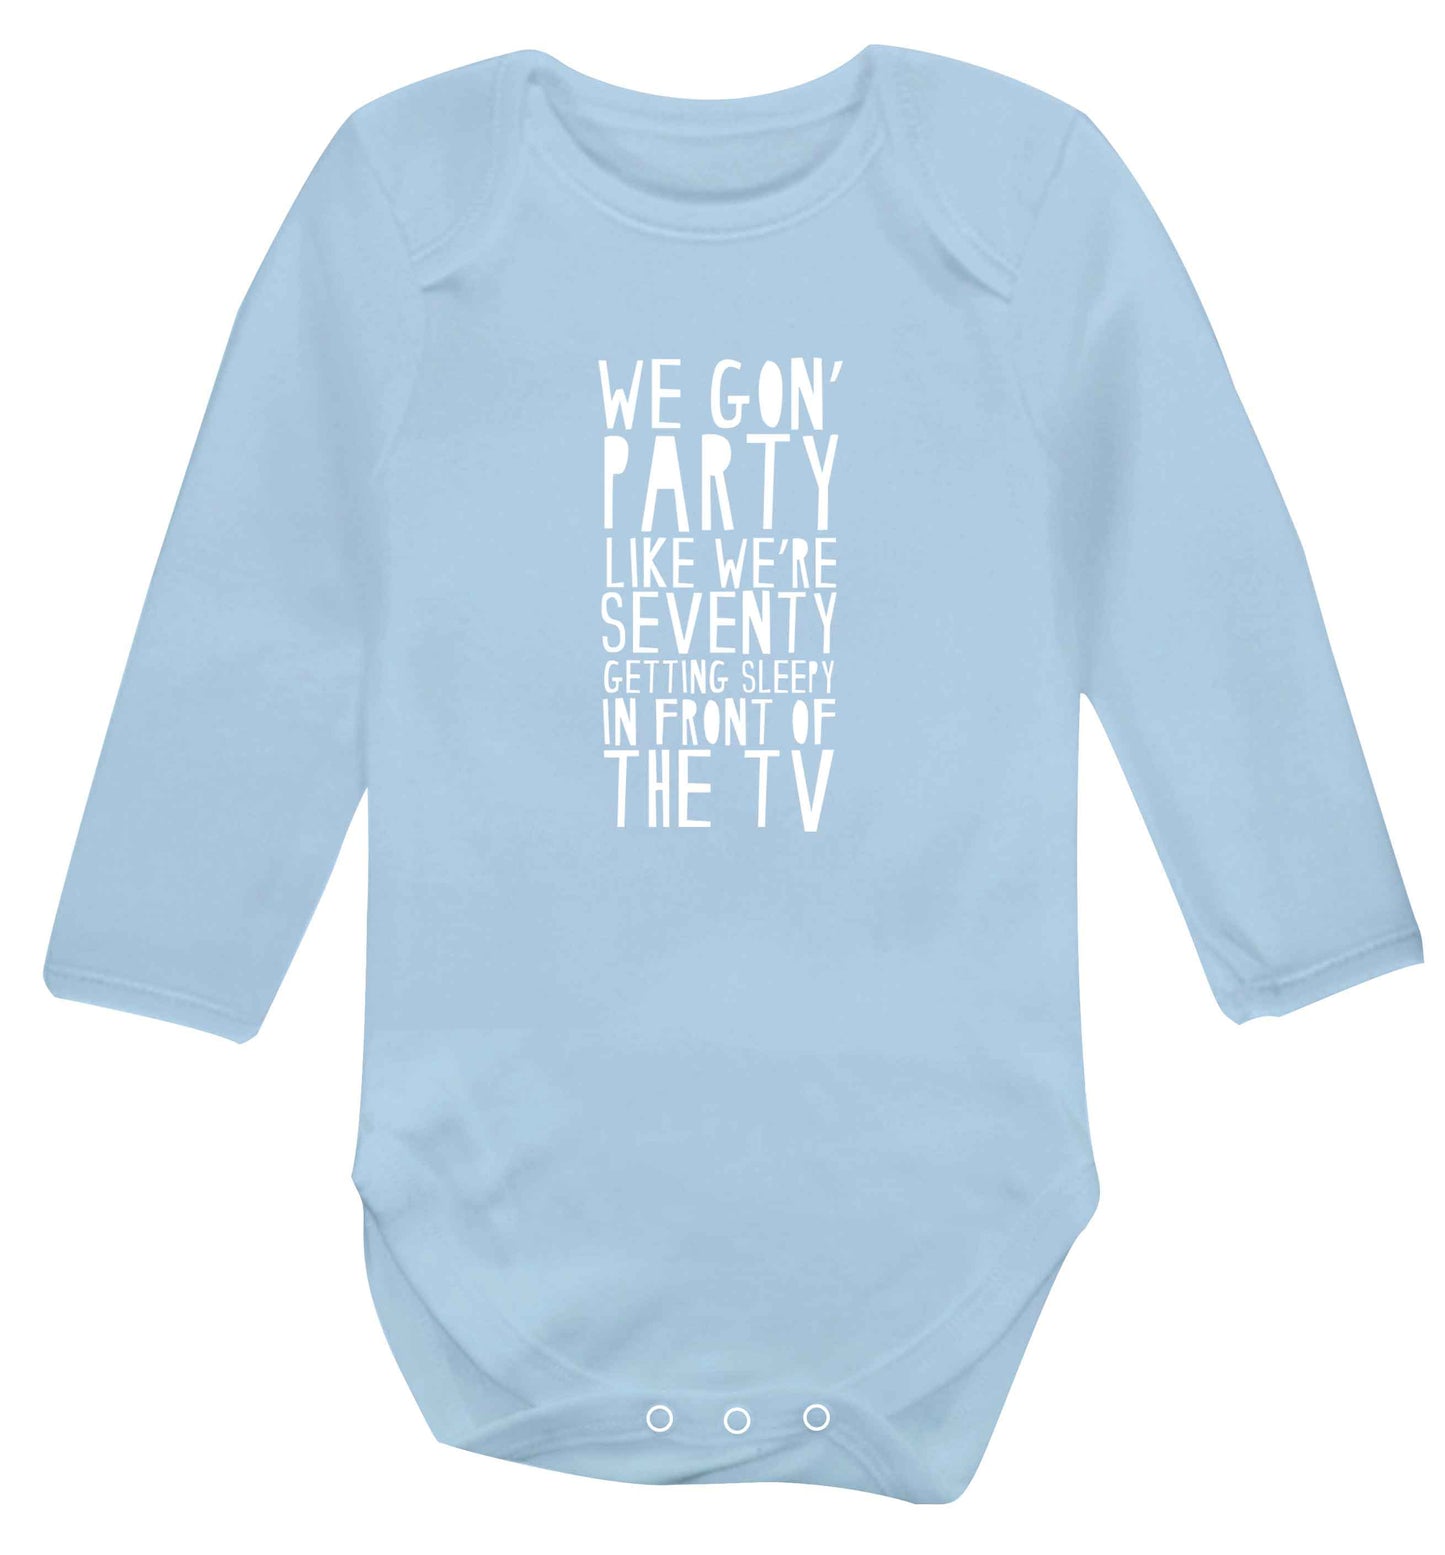 We gon' party like we're seventy getting sleepy in front of the TV baby vest long sleeved pale blue 6-12 months